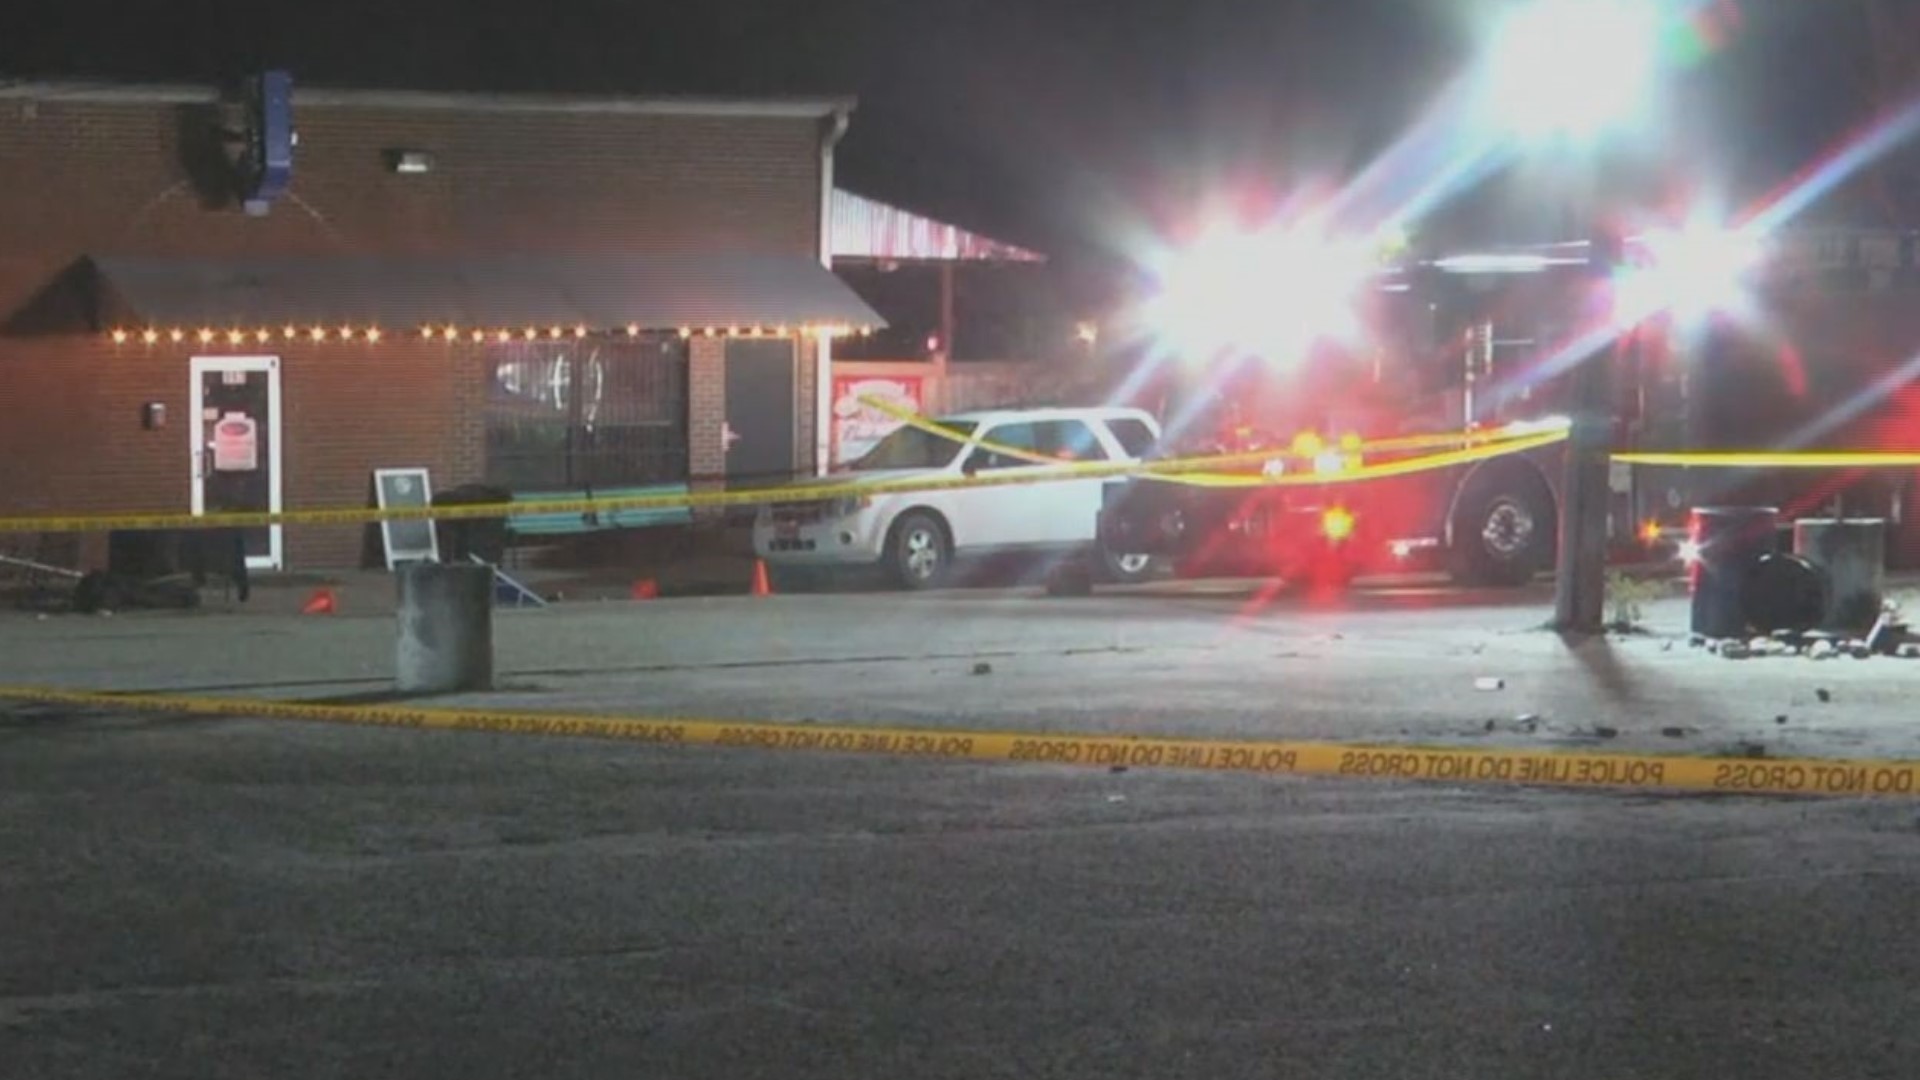 Two people are dead and seven people have been injured following a shooting at a South Carolina bar.